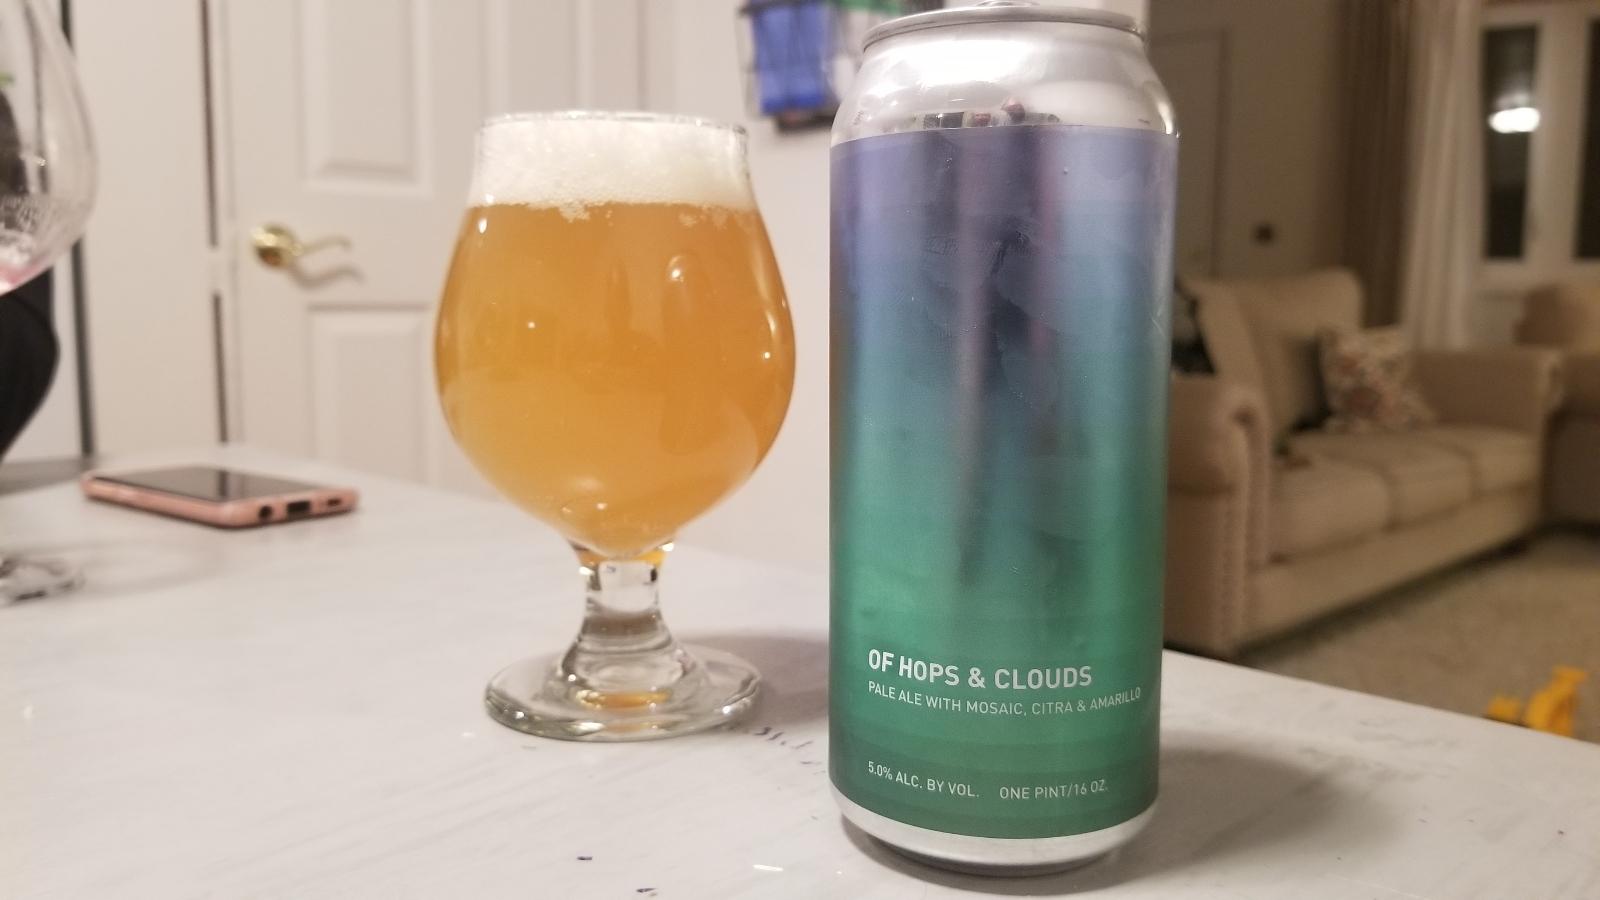 Of Hops & Clouds